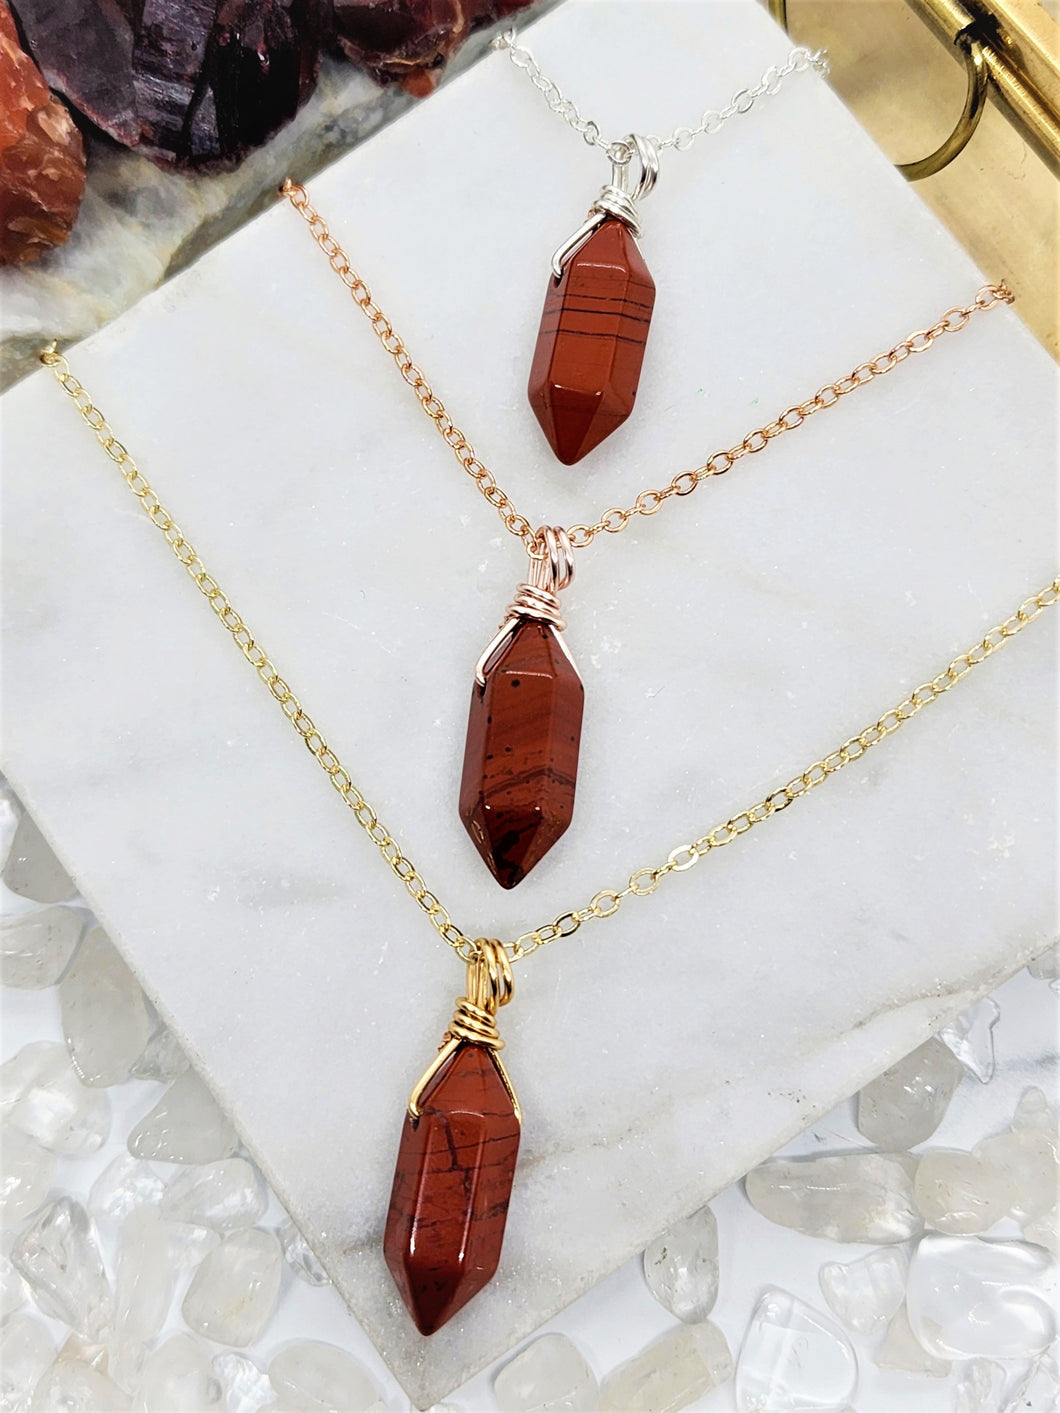 Promoting inner balance and tranquillity, Jasper is a stone of strength and determination that also supports physical healing and general wellbeing